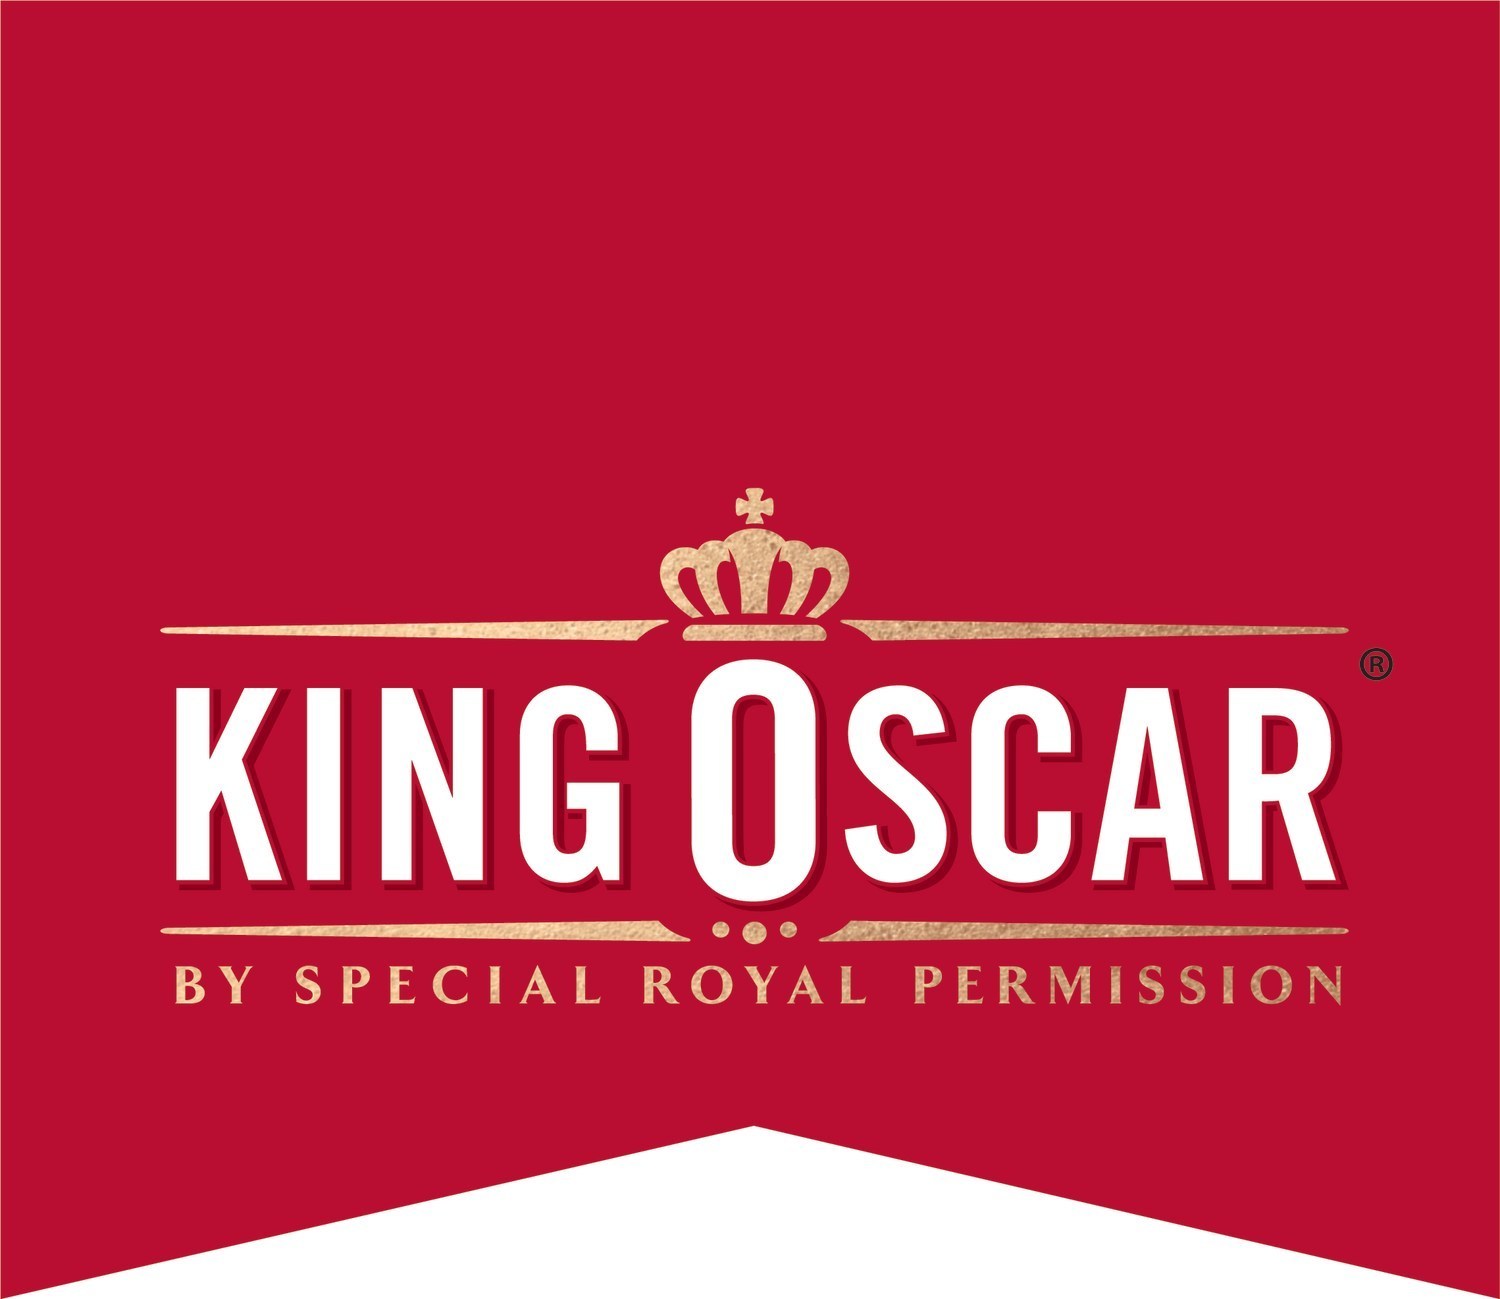 King Oscar Now the Top Specialty Canned Seafood Brand in the U.S.